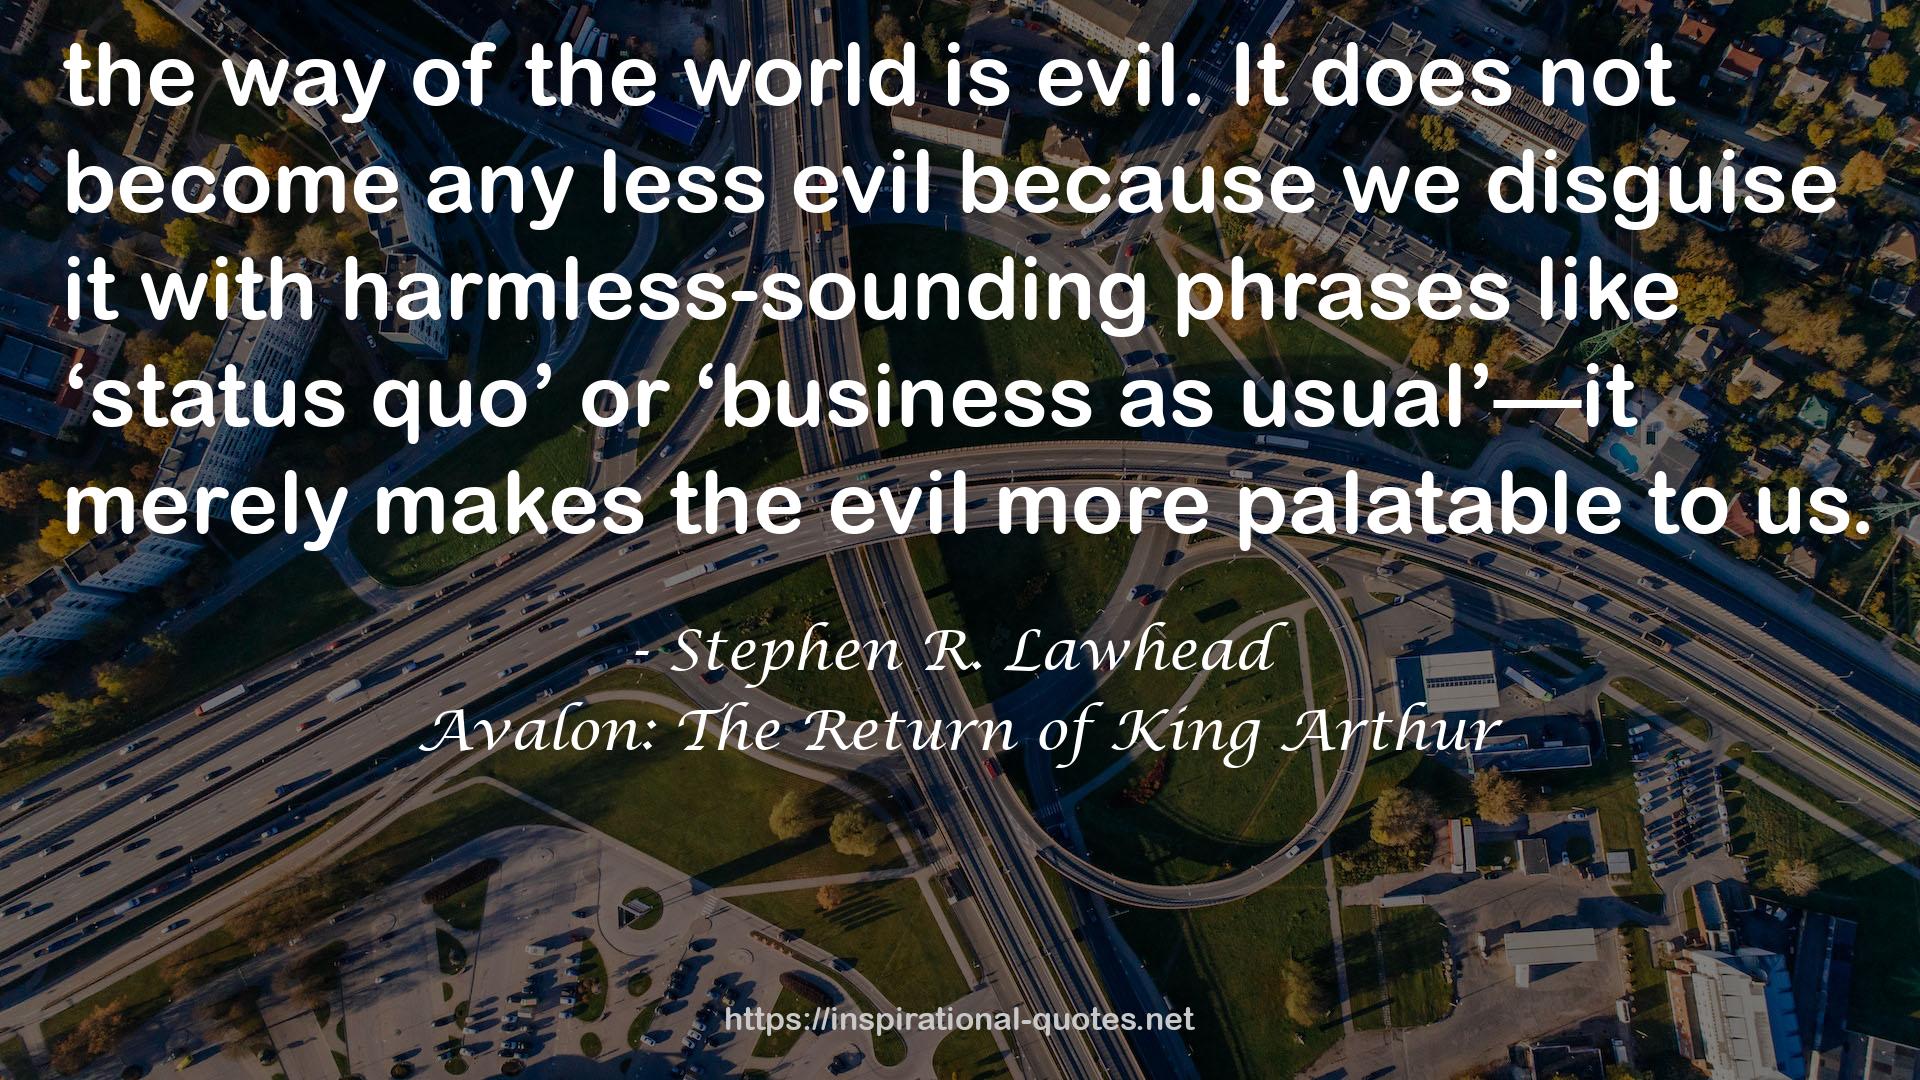 Stephen R. Lawhead QUOTES